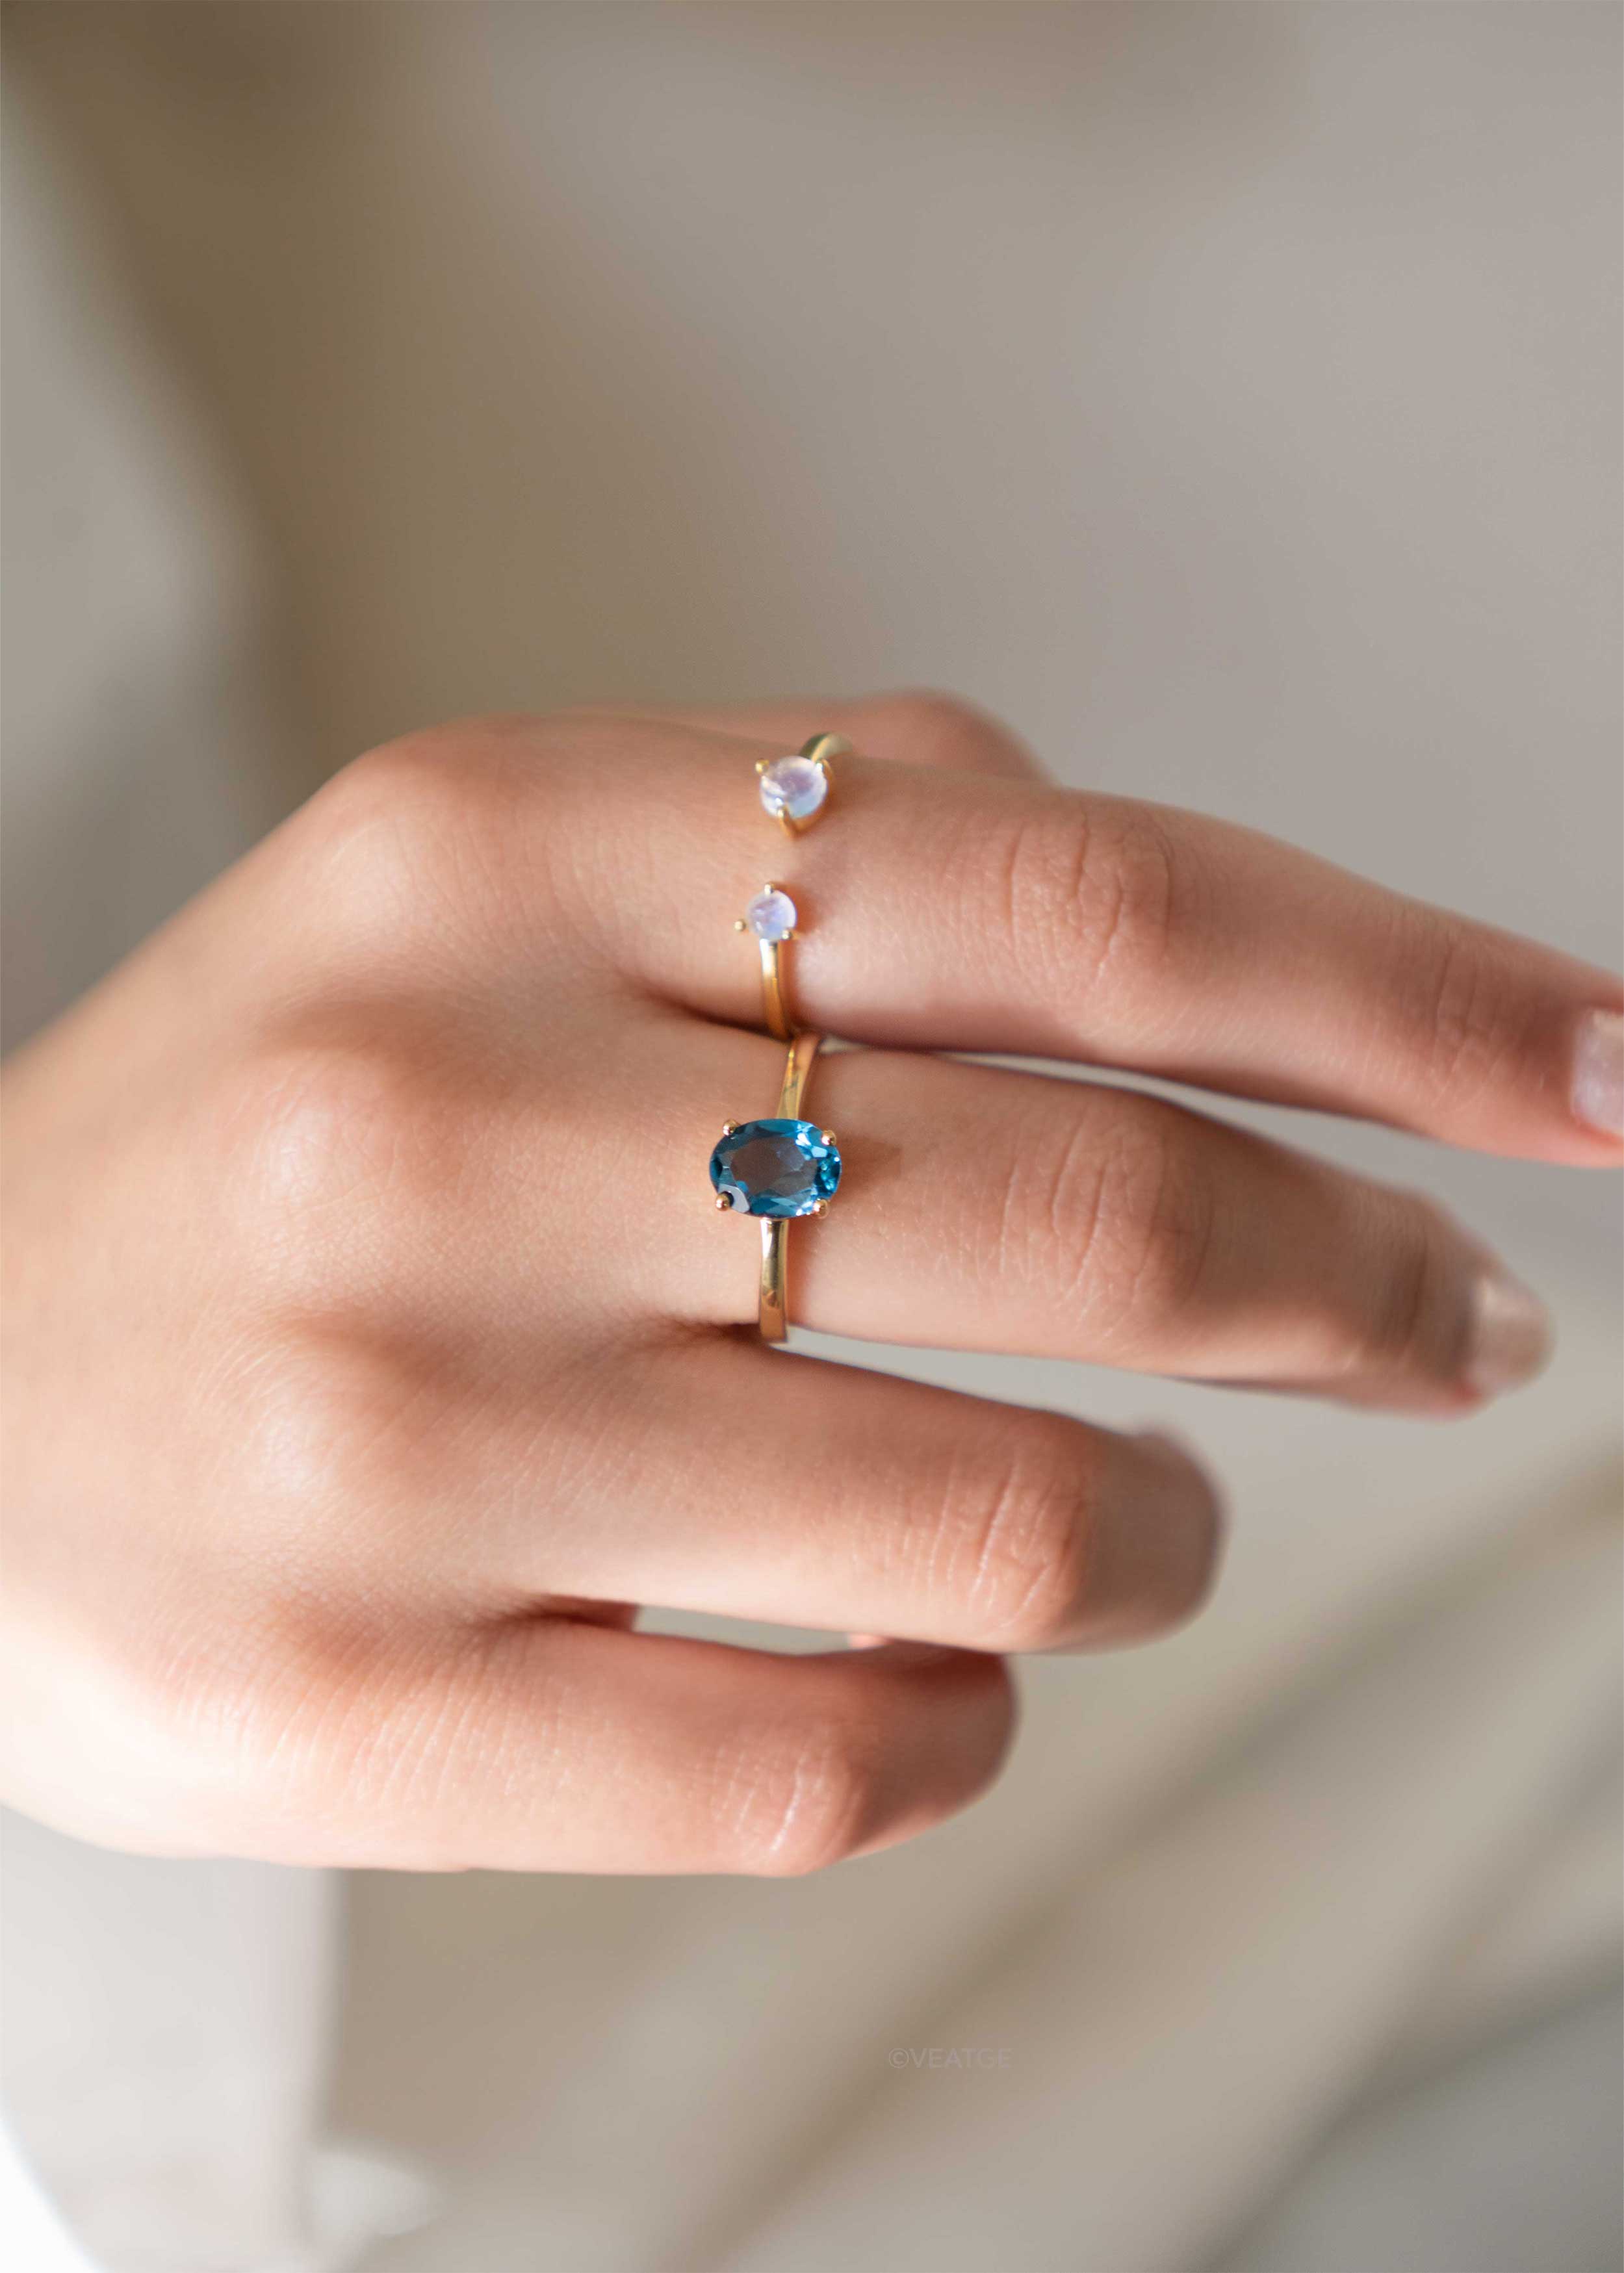 stacking minimal london blue topaz gold ring proposal promise engagement wedding replacement alternative band ring real gemstone december birthstone birthdays best gifts for women